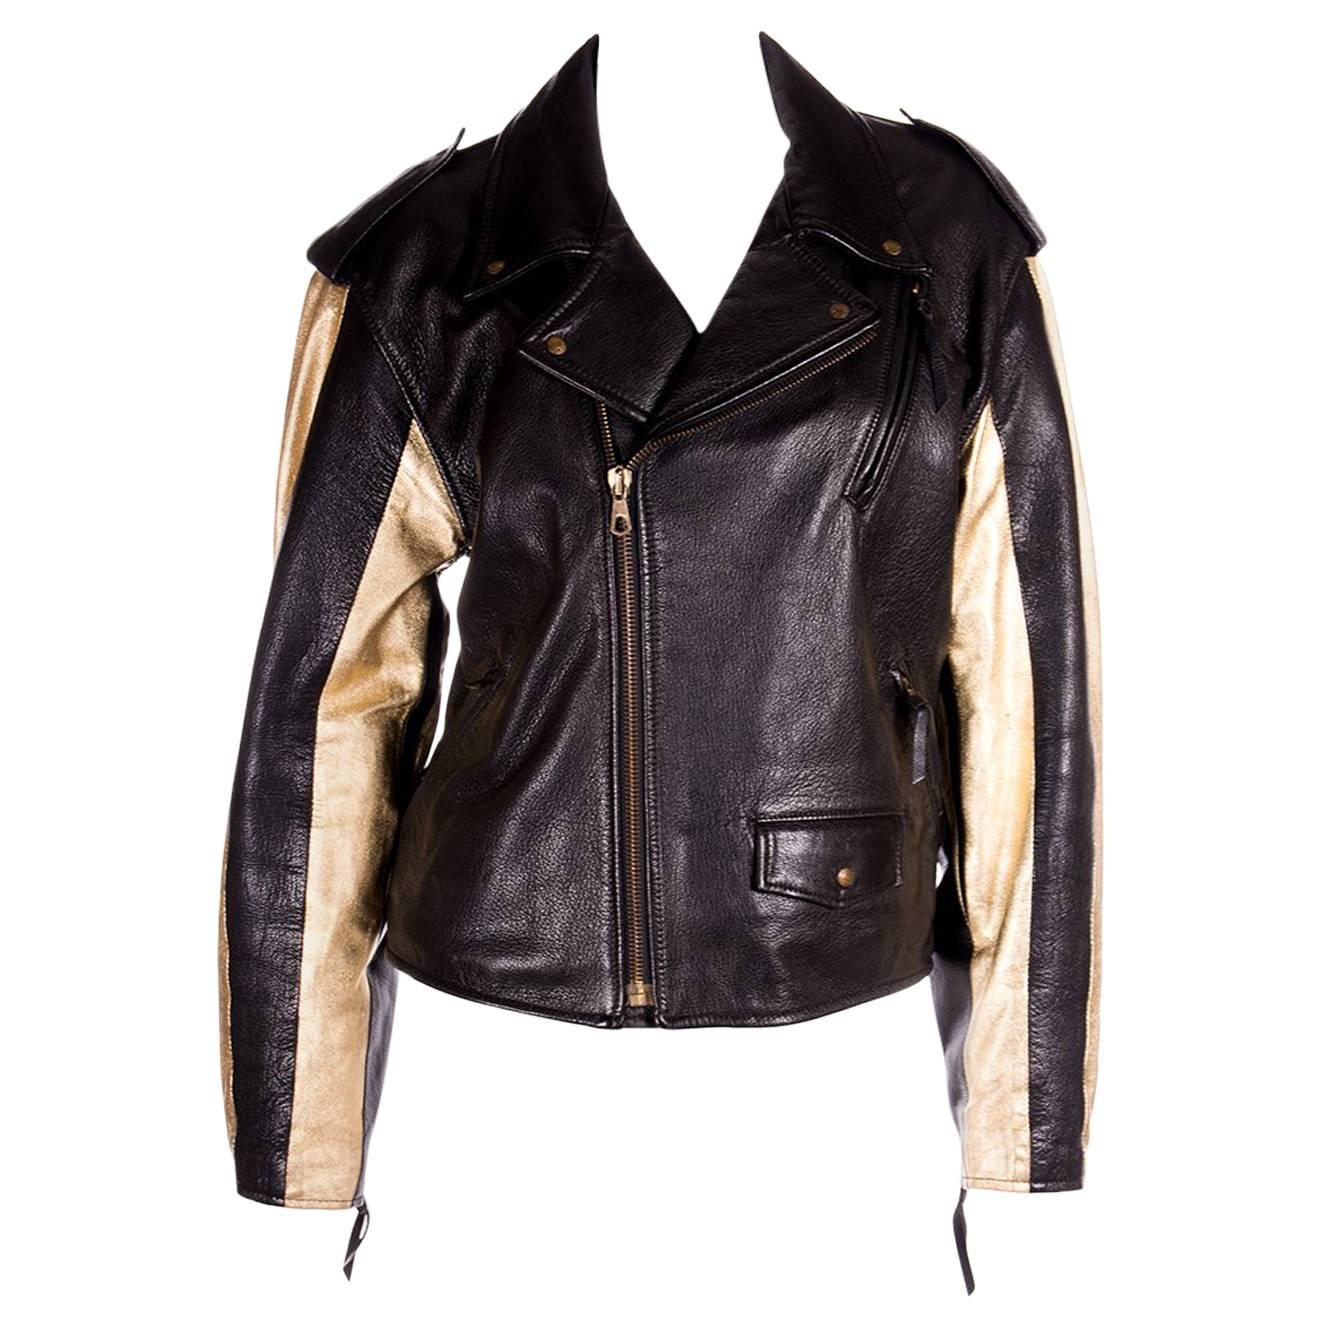 Moschino Leather Biker Jacket with Gold Stripe Sleeves